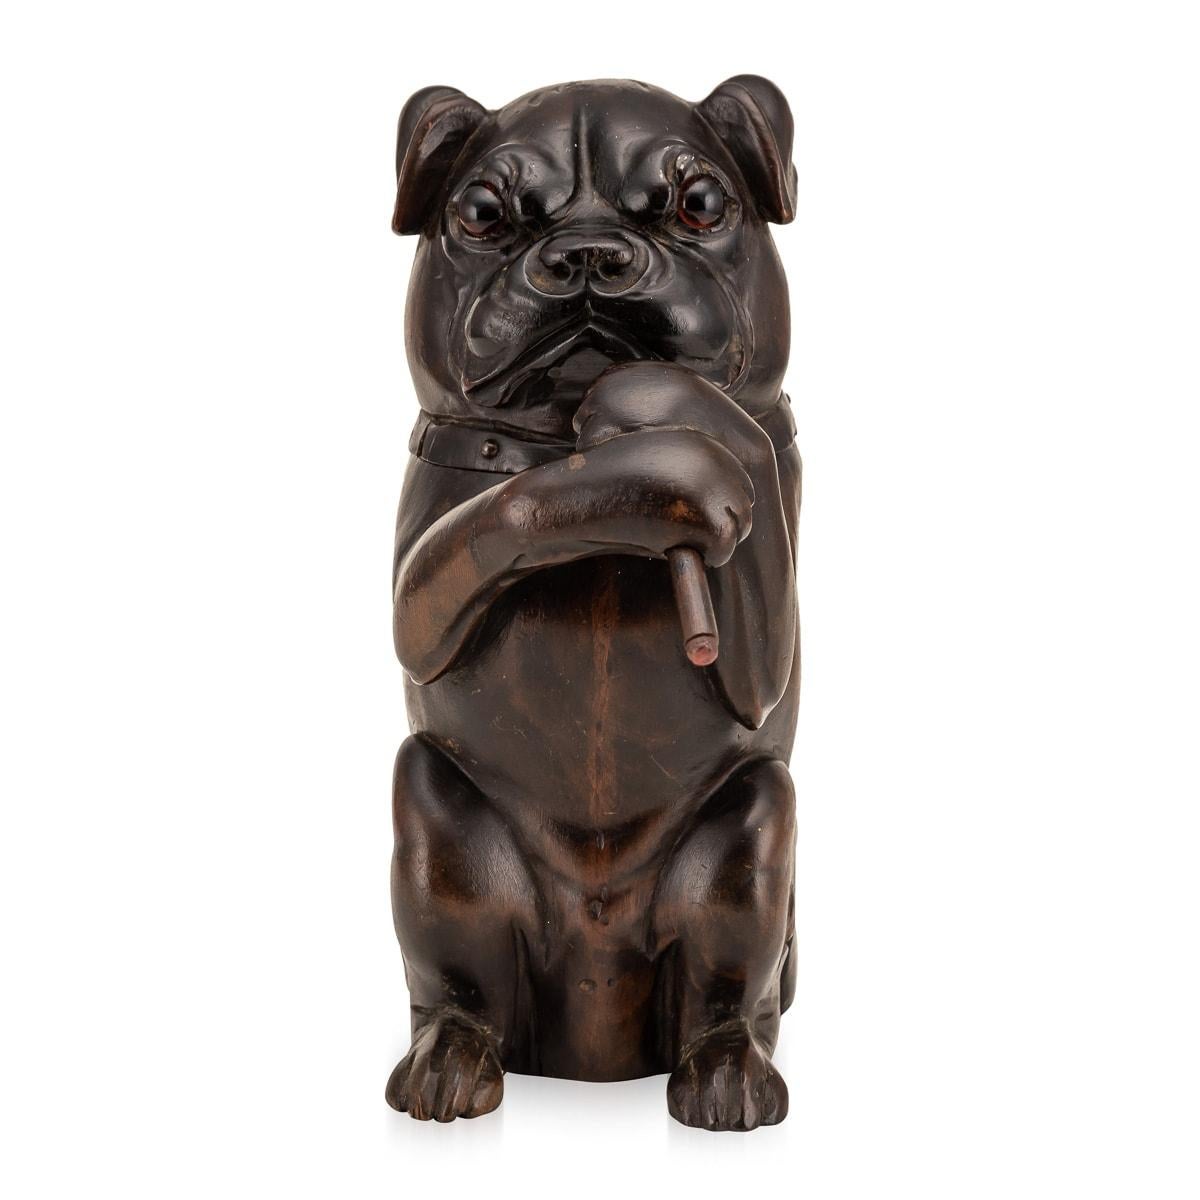 Antique 19th Century Victorian lignum vitae Tobacco Jar carved in the form of a smoking bulldog sitting on his hind legs. Lined with original lead and has glass eyes. A truly wonderful piece and a must desk accessory for a dog lover.

CONDITION
In